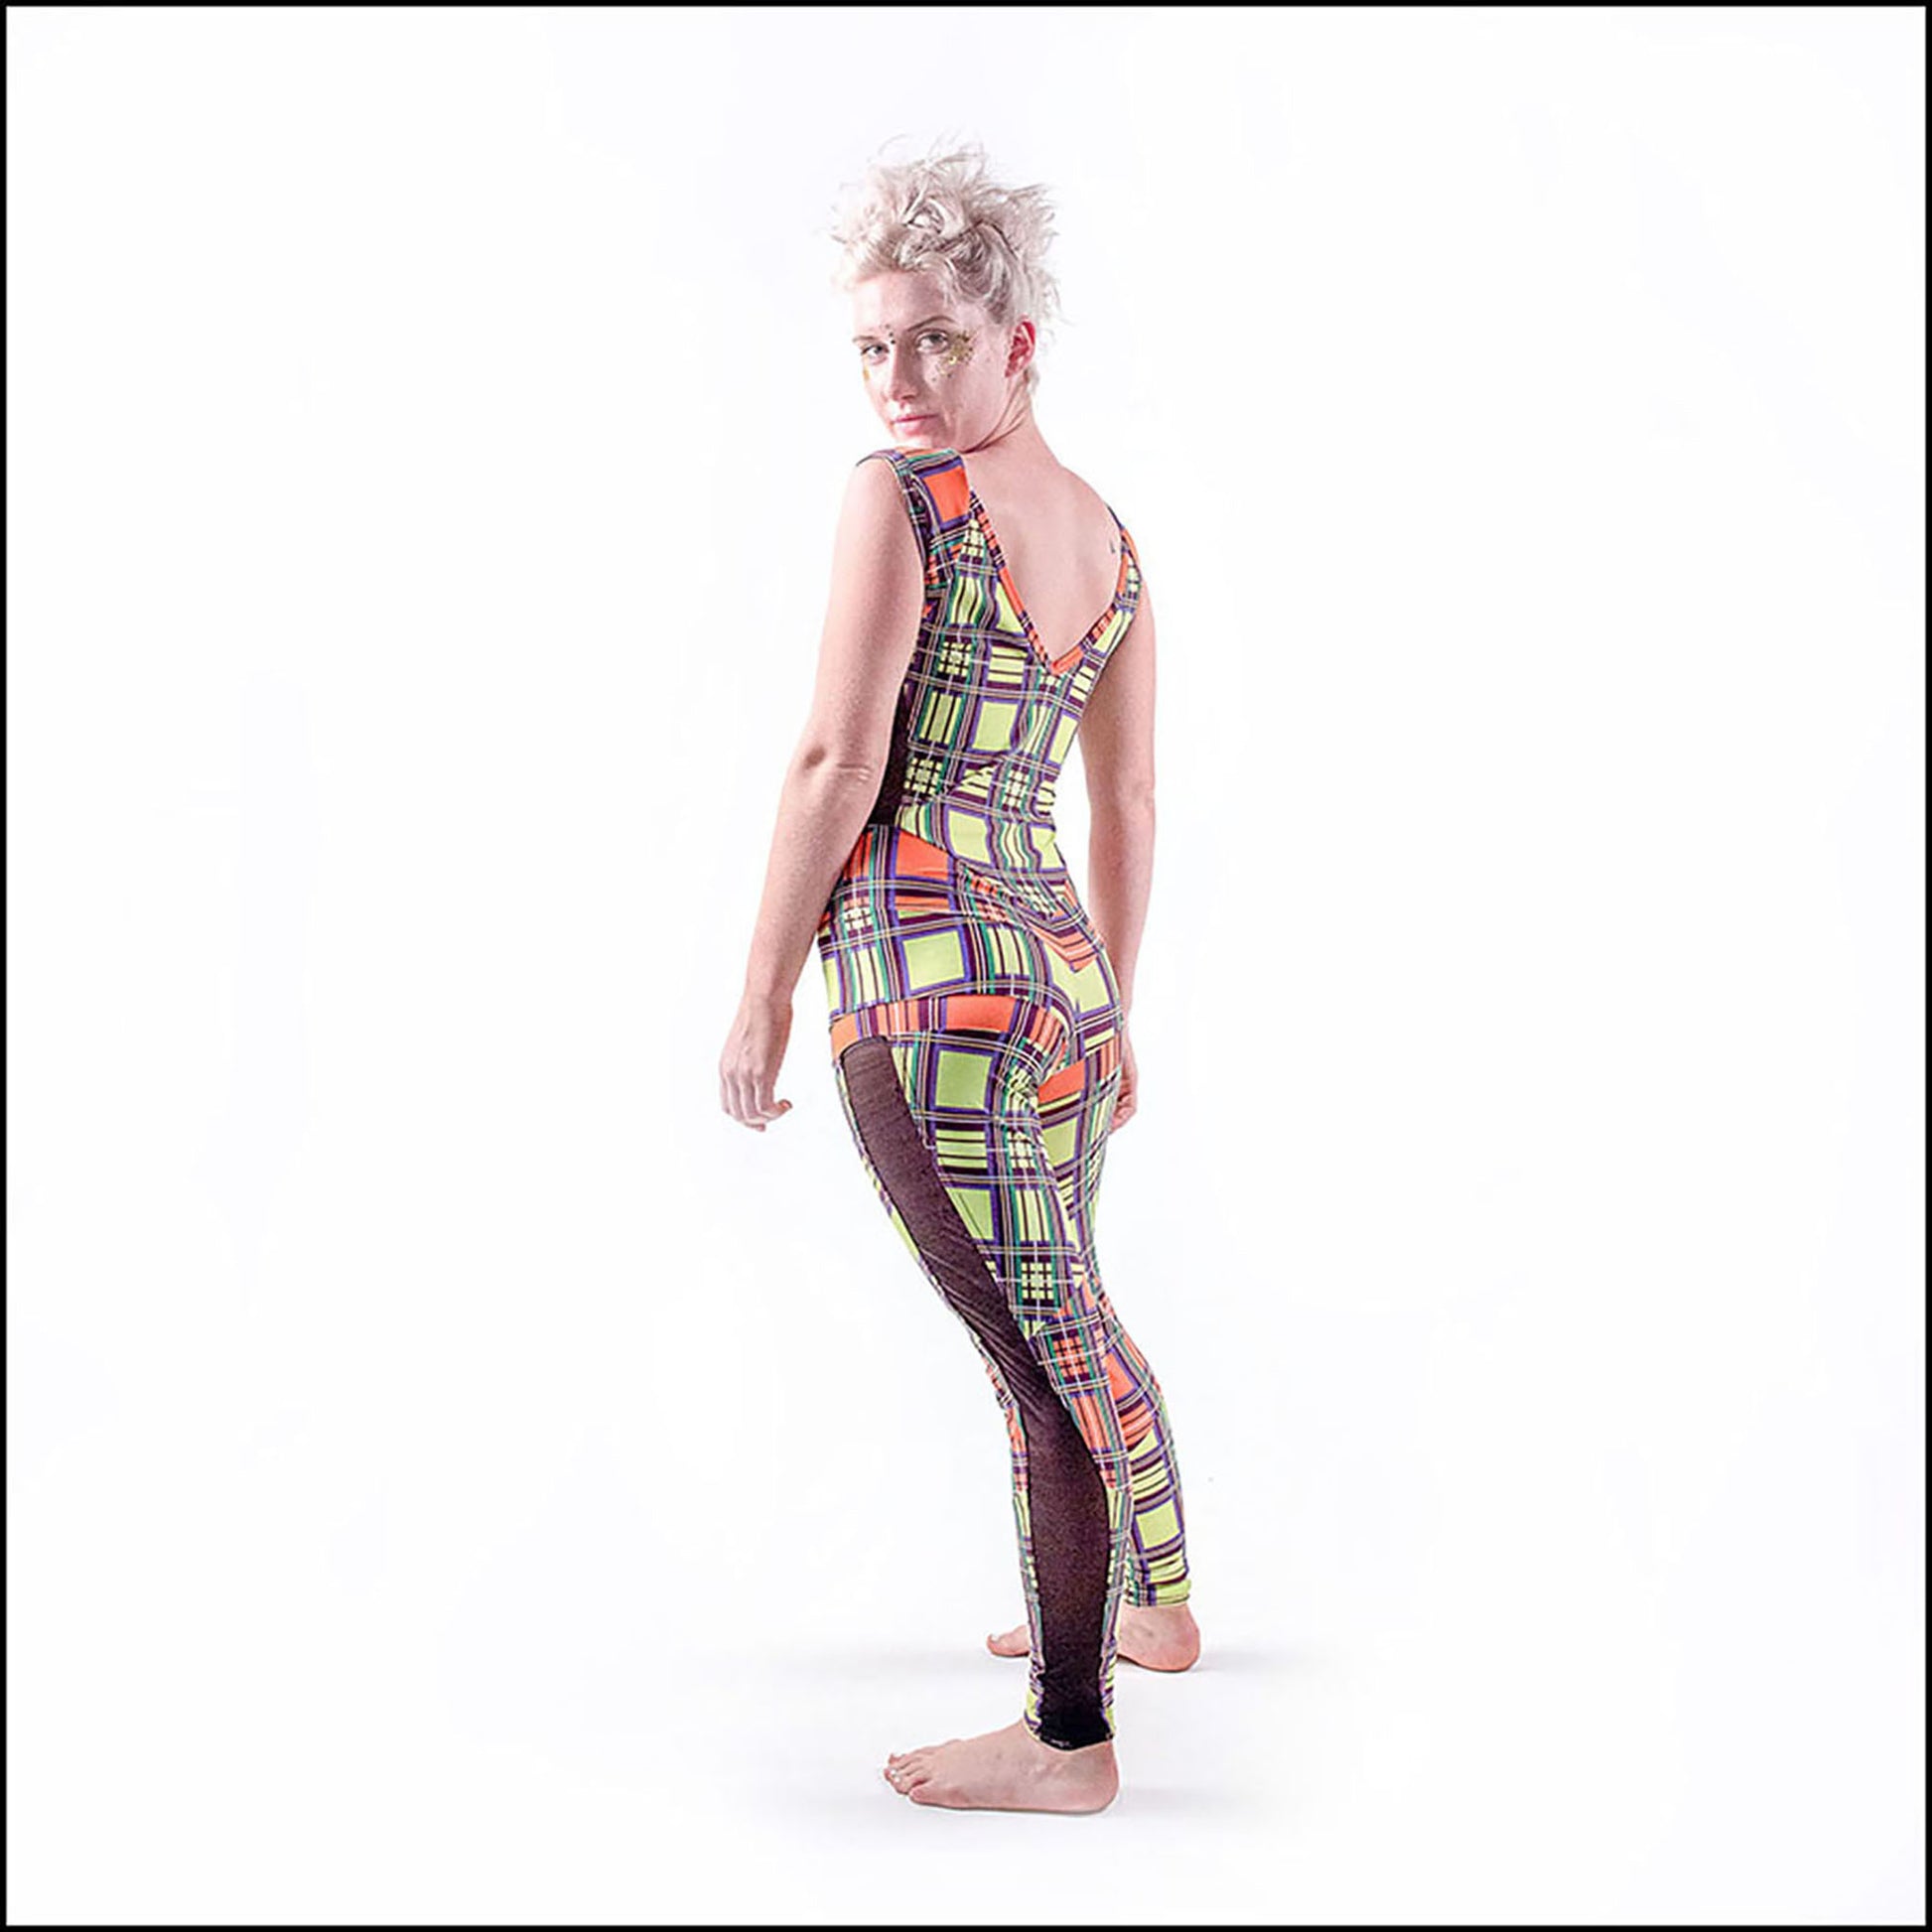 Neon Tartan Catsuit, a handmade-to-order piece in yellow and orange neon tartan printed spandex. This statement catsuit is both stylish and sustainable. The reversible design features a square mesh front neck and v-shaped back neck (for the style reversed see the Mardi Gras Catsuit). It includes black mesh side panels and multiple contrast panels. 